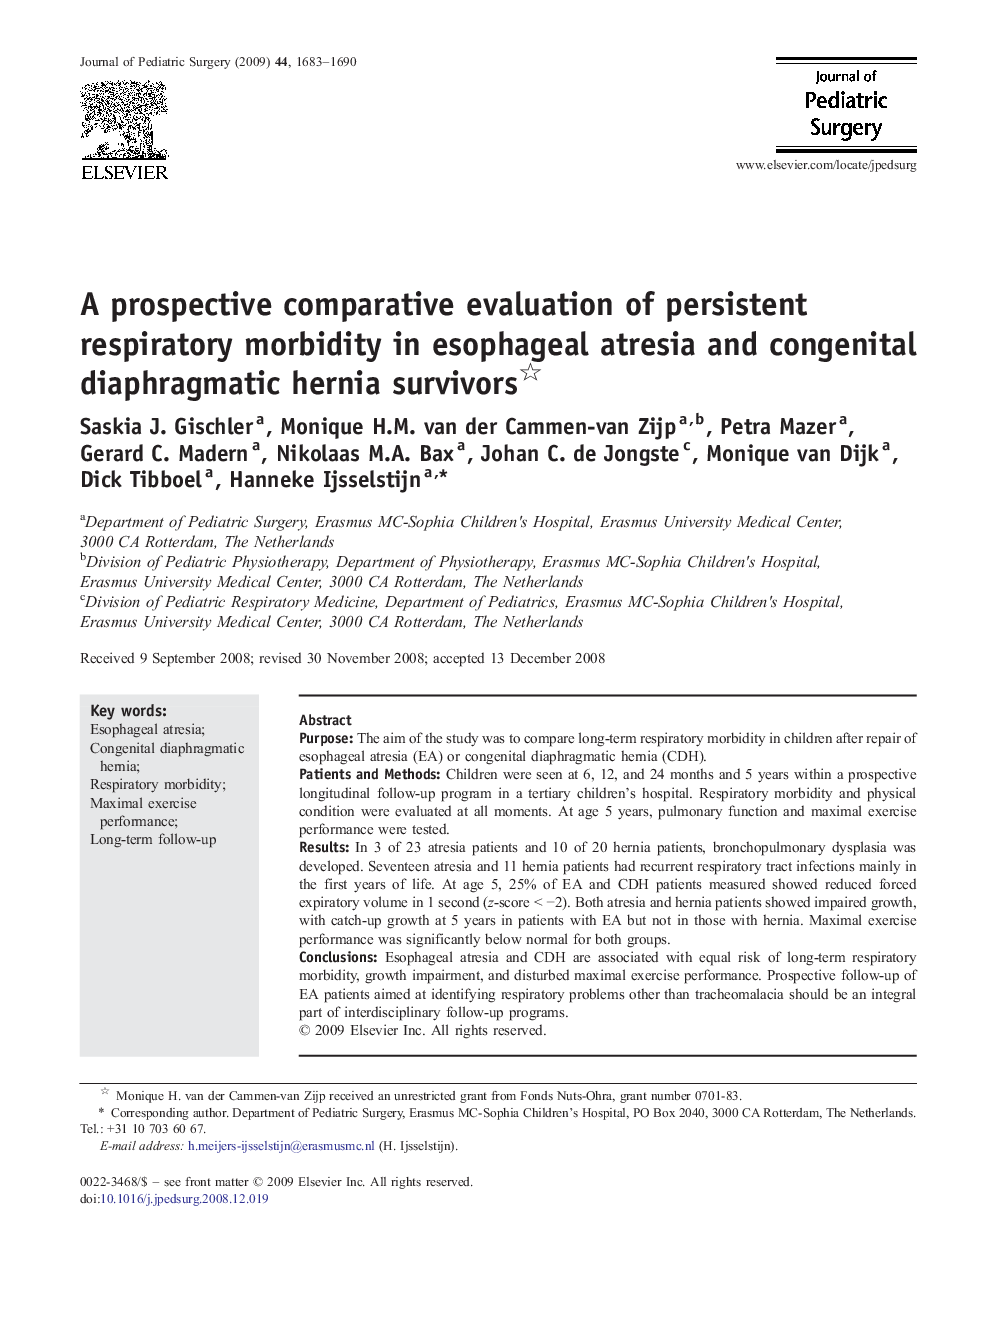 A prospective comparative evaluation of persistent respiratory morbidity in esophageal atresia and congenital diaphragmatic hernia survivors 